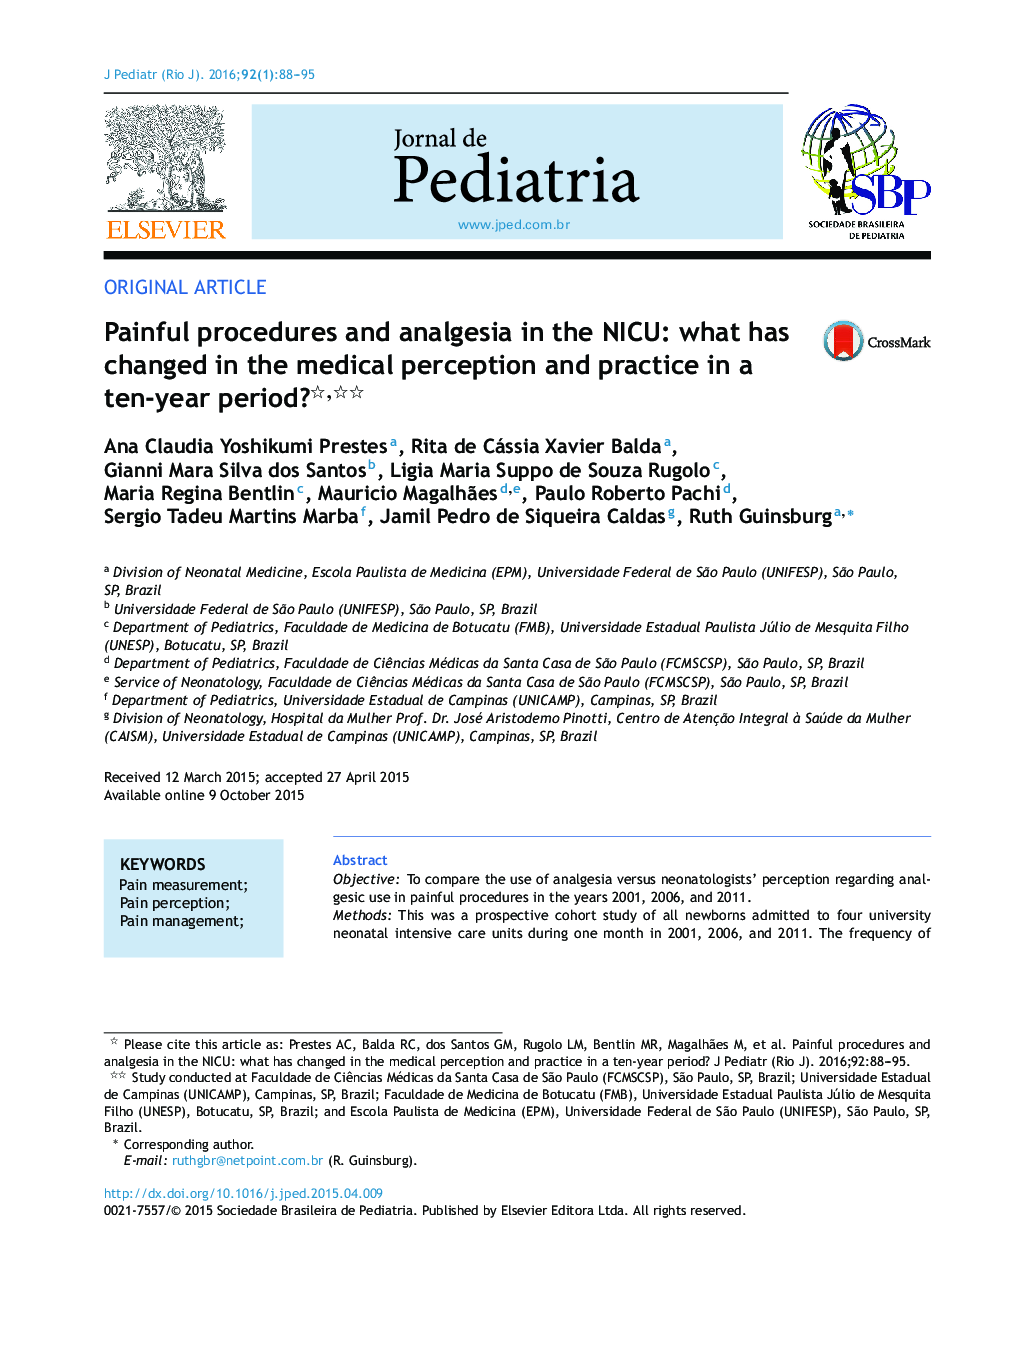 Painful procedures and analgesia in the NICU: what has changed in the medical perception and practice in a ten-year period? 